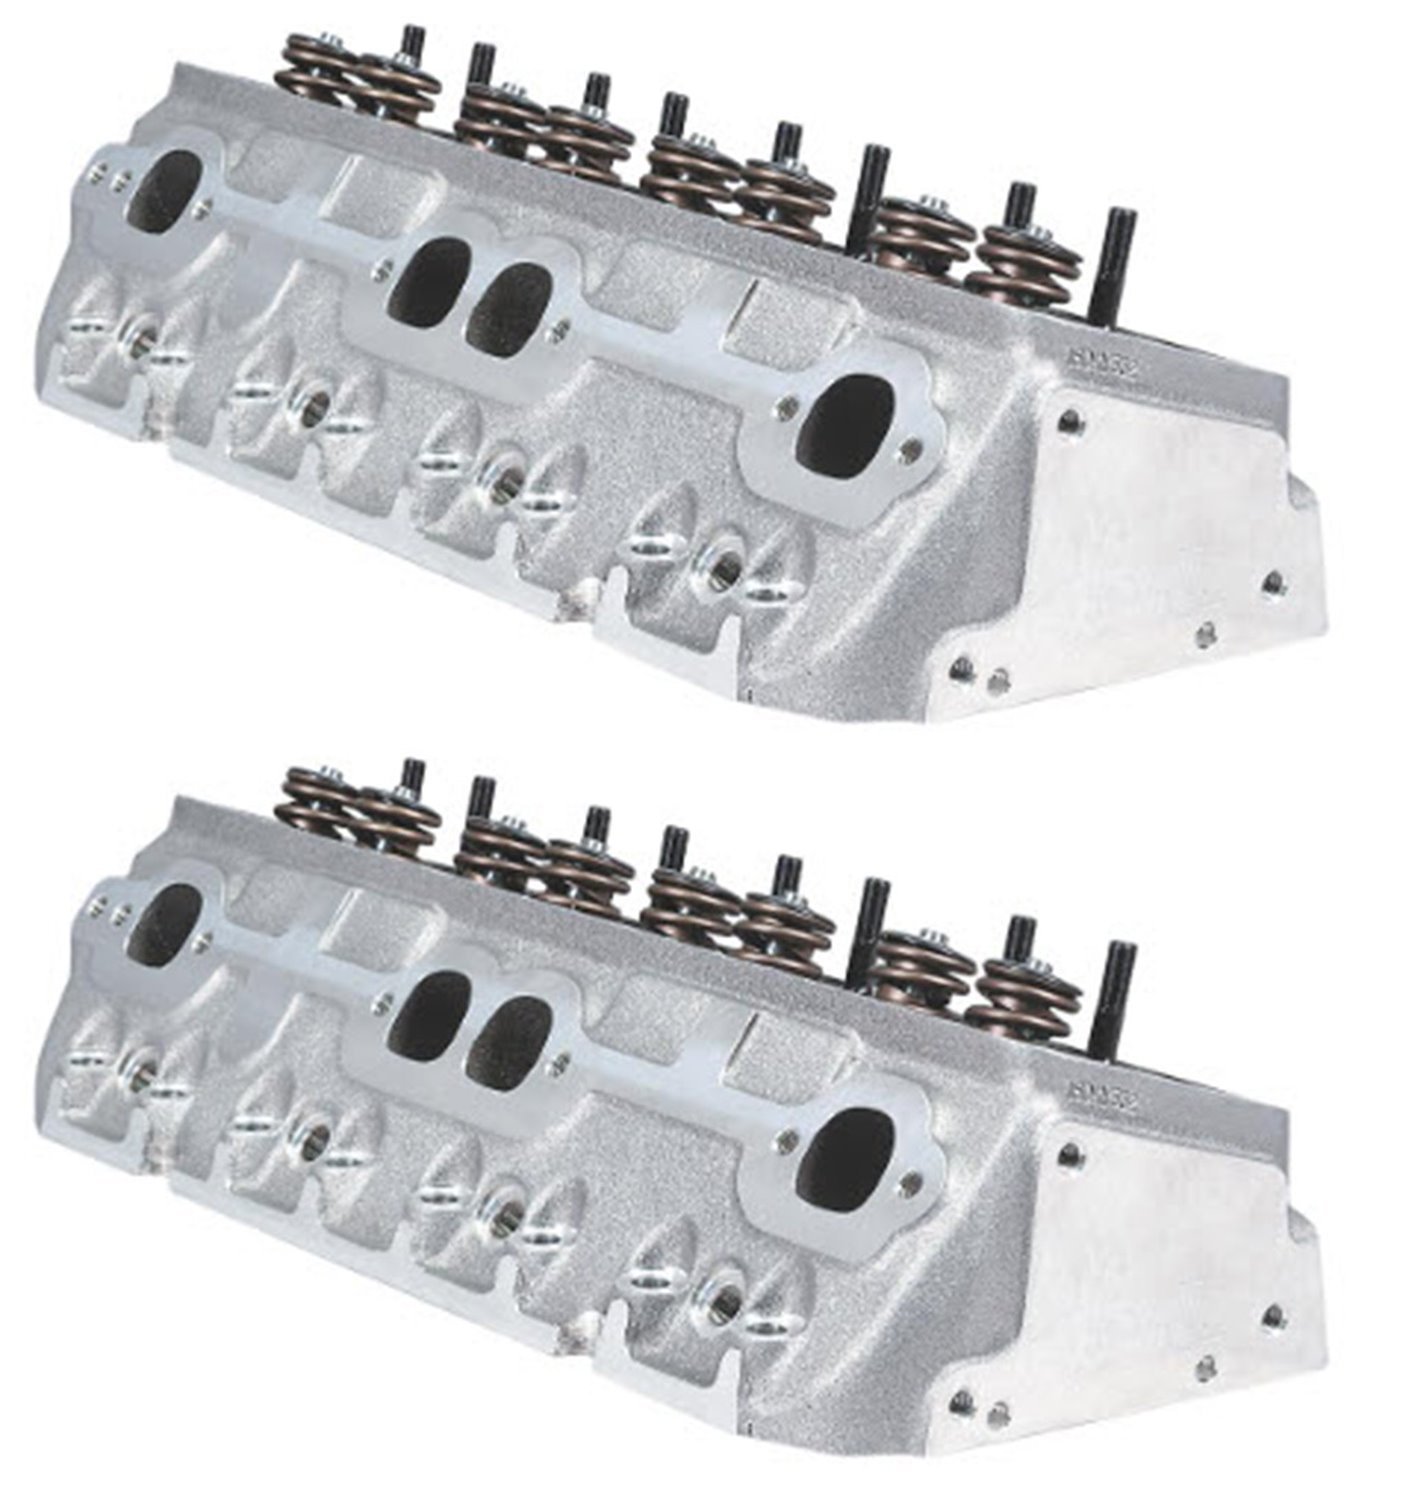 1021004 Aluminum Cylinder Heads IK 180 Series w/180 cc Intake Runners [64 cc Combustion Chambers]